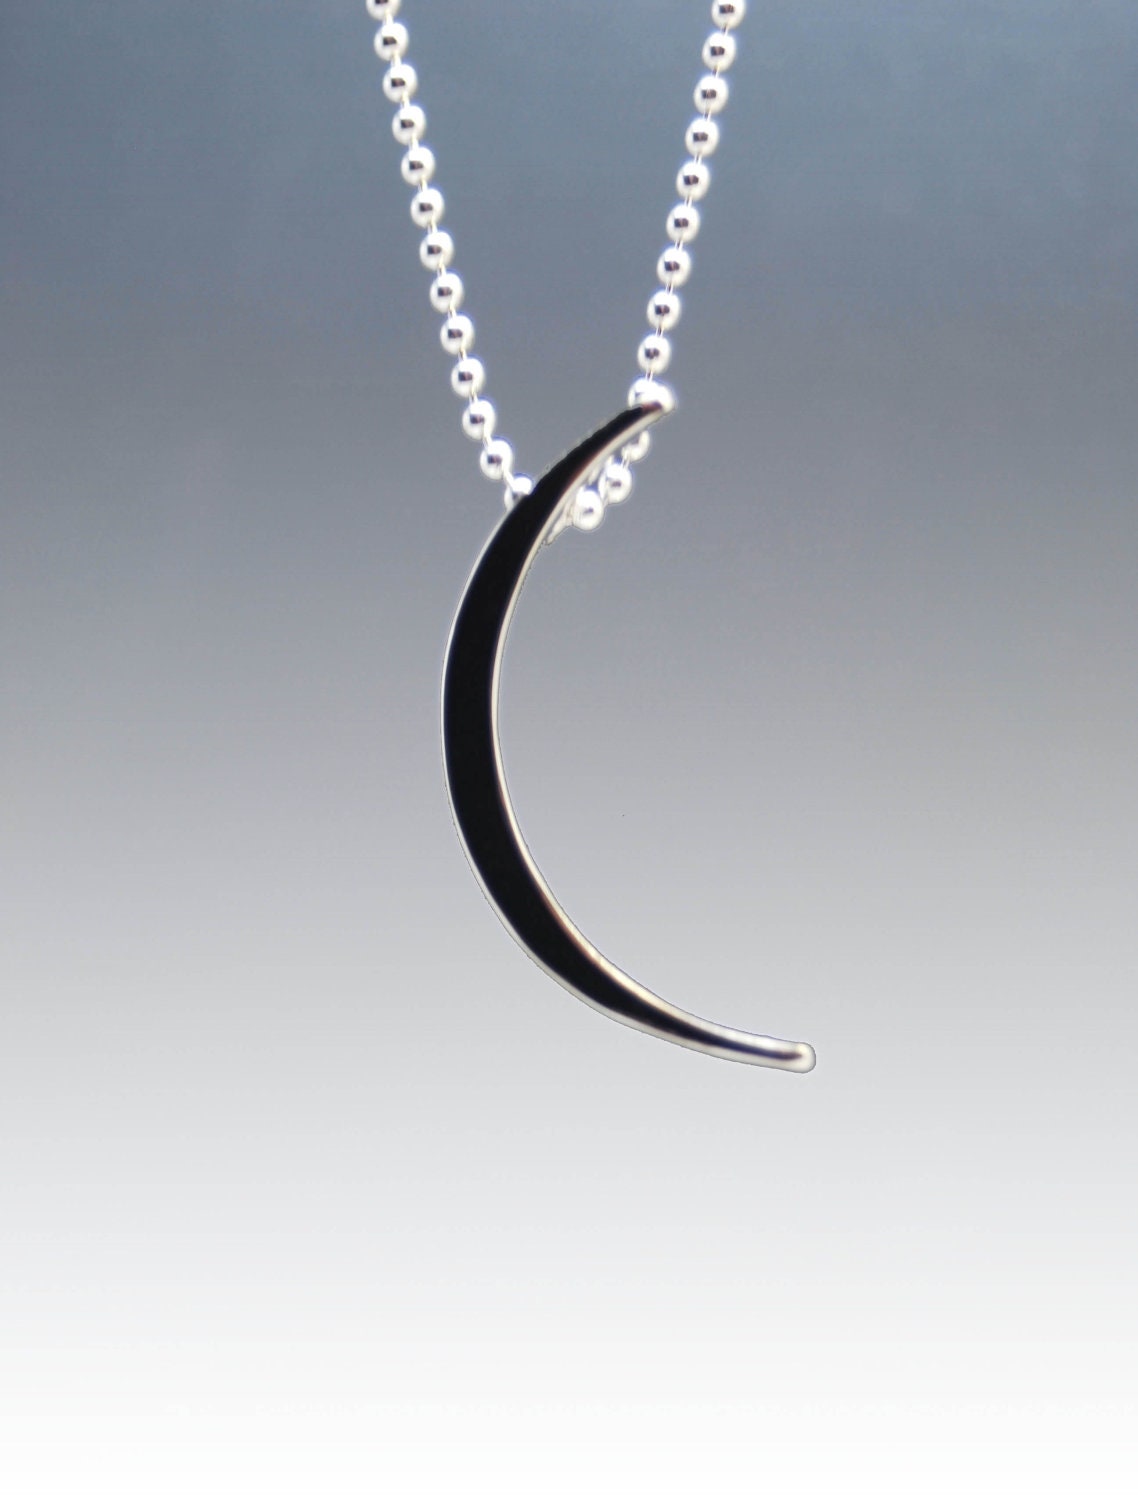 crescent moon pendant in sterling silver- hand forged silver moon necklace- artisan jewerly- made to order- Moon Winks - AnnealedHeart